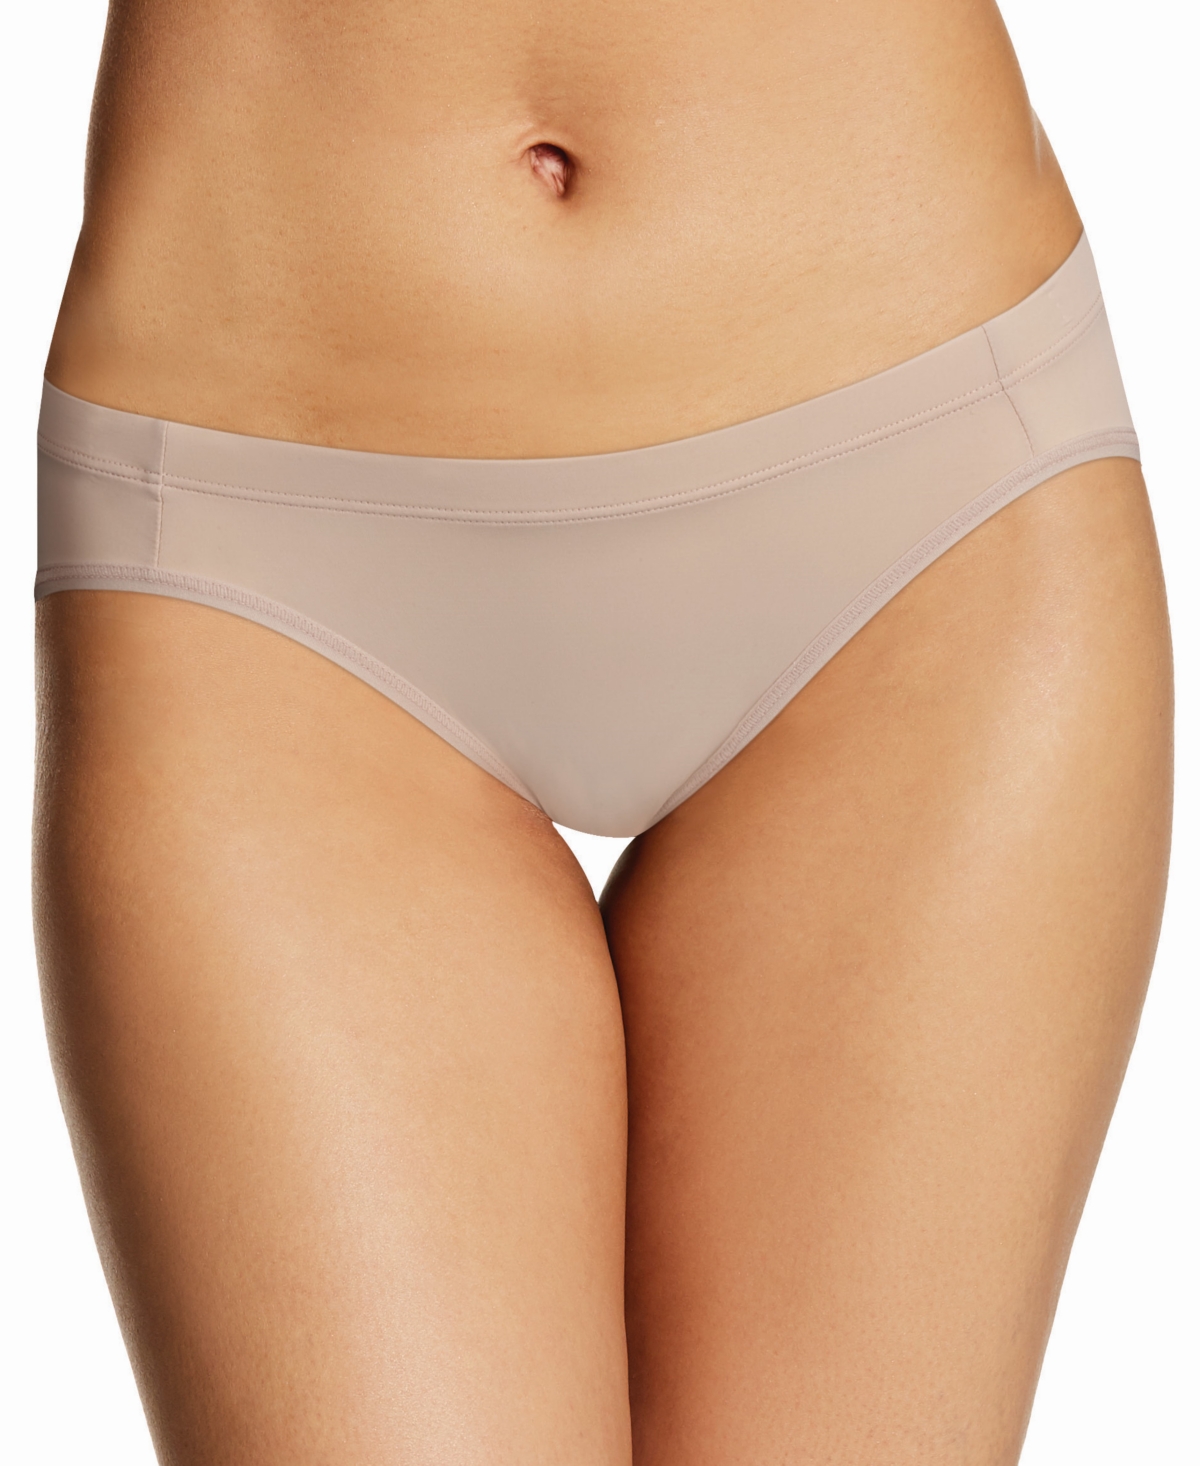 Women's Barely There Invisible Look Bikini Dmbtbk - Paris Nude